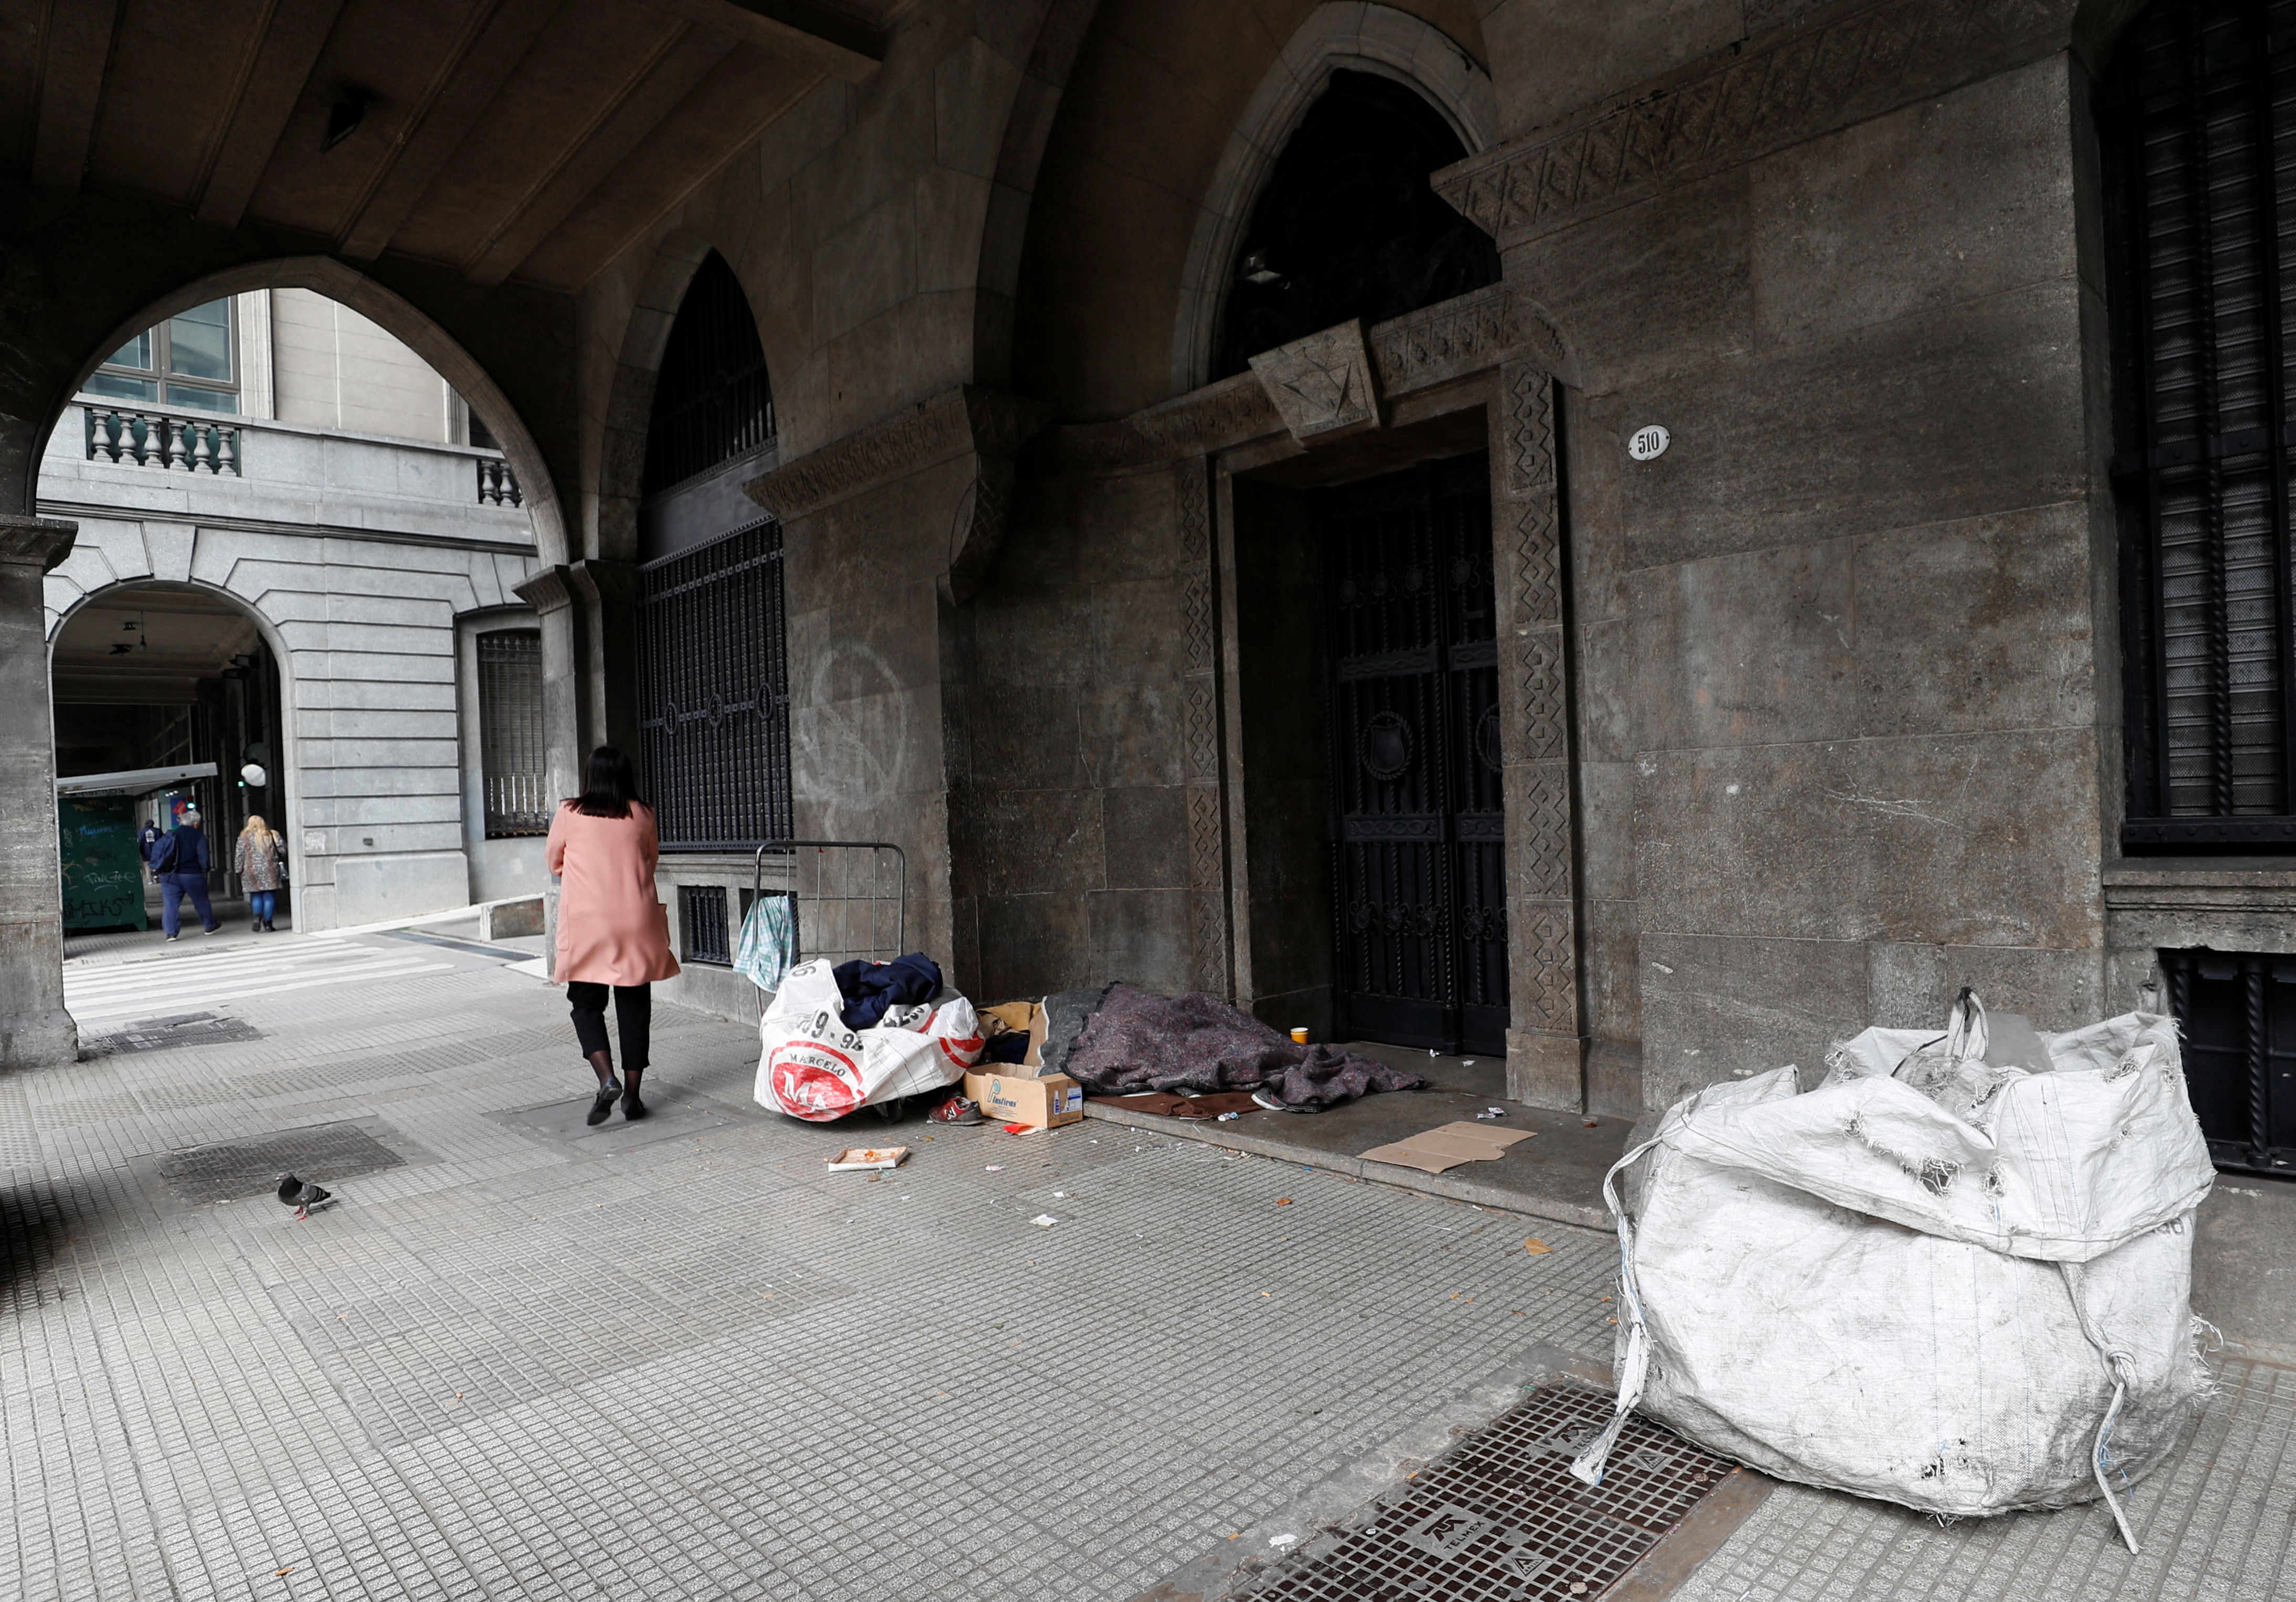 A homeless person sleeps in the street, in downtown Buenos Aires